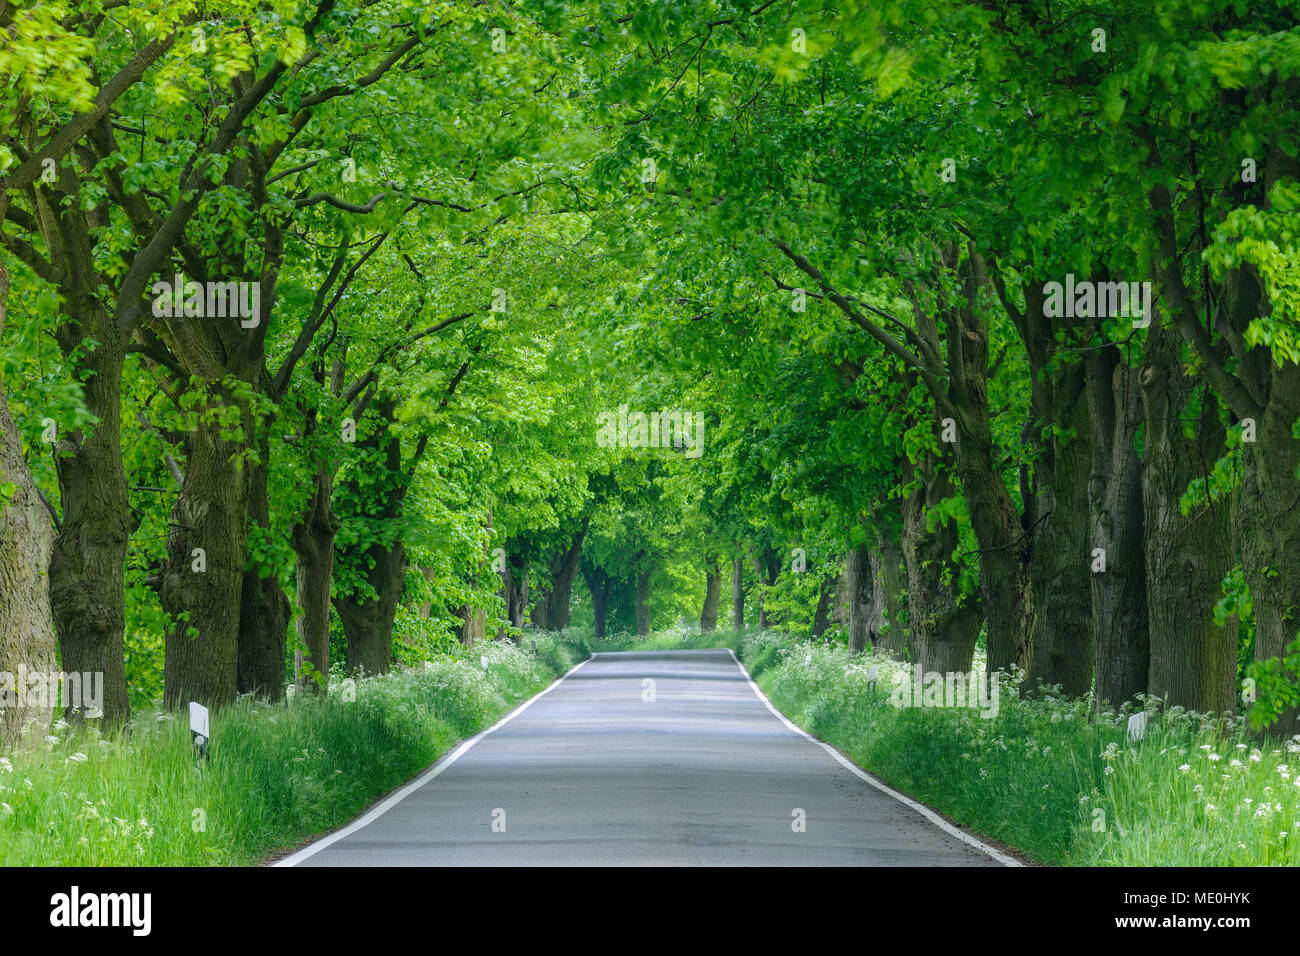 Street lined with lime trees in spring on the Island of Ruegen in Mecklenburg-Western Pommerania, Germany Stock Photo